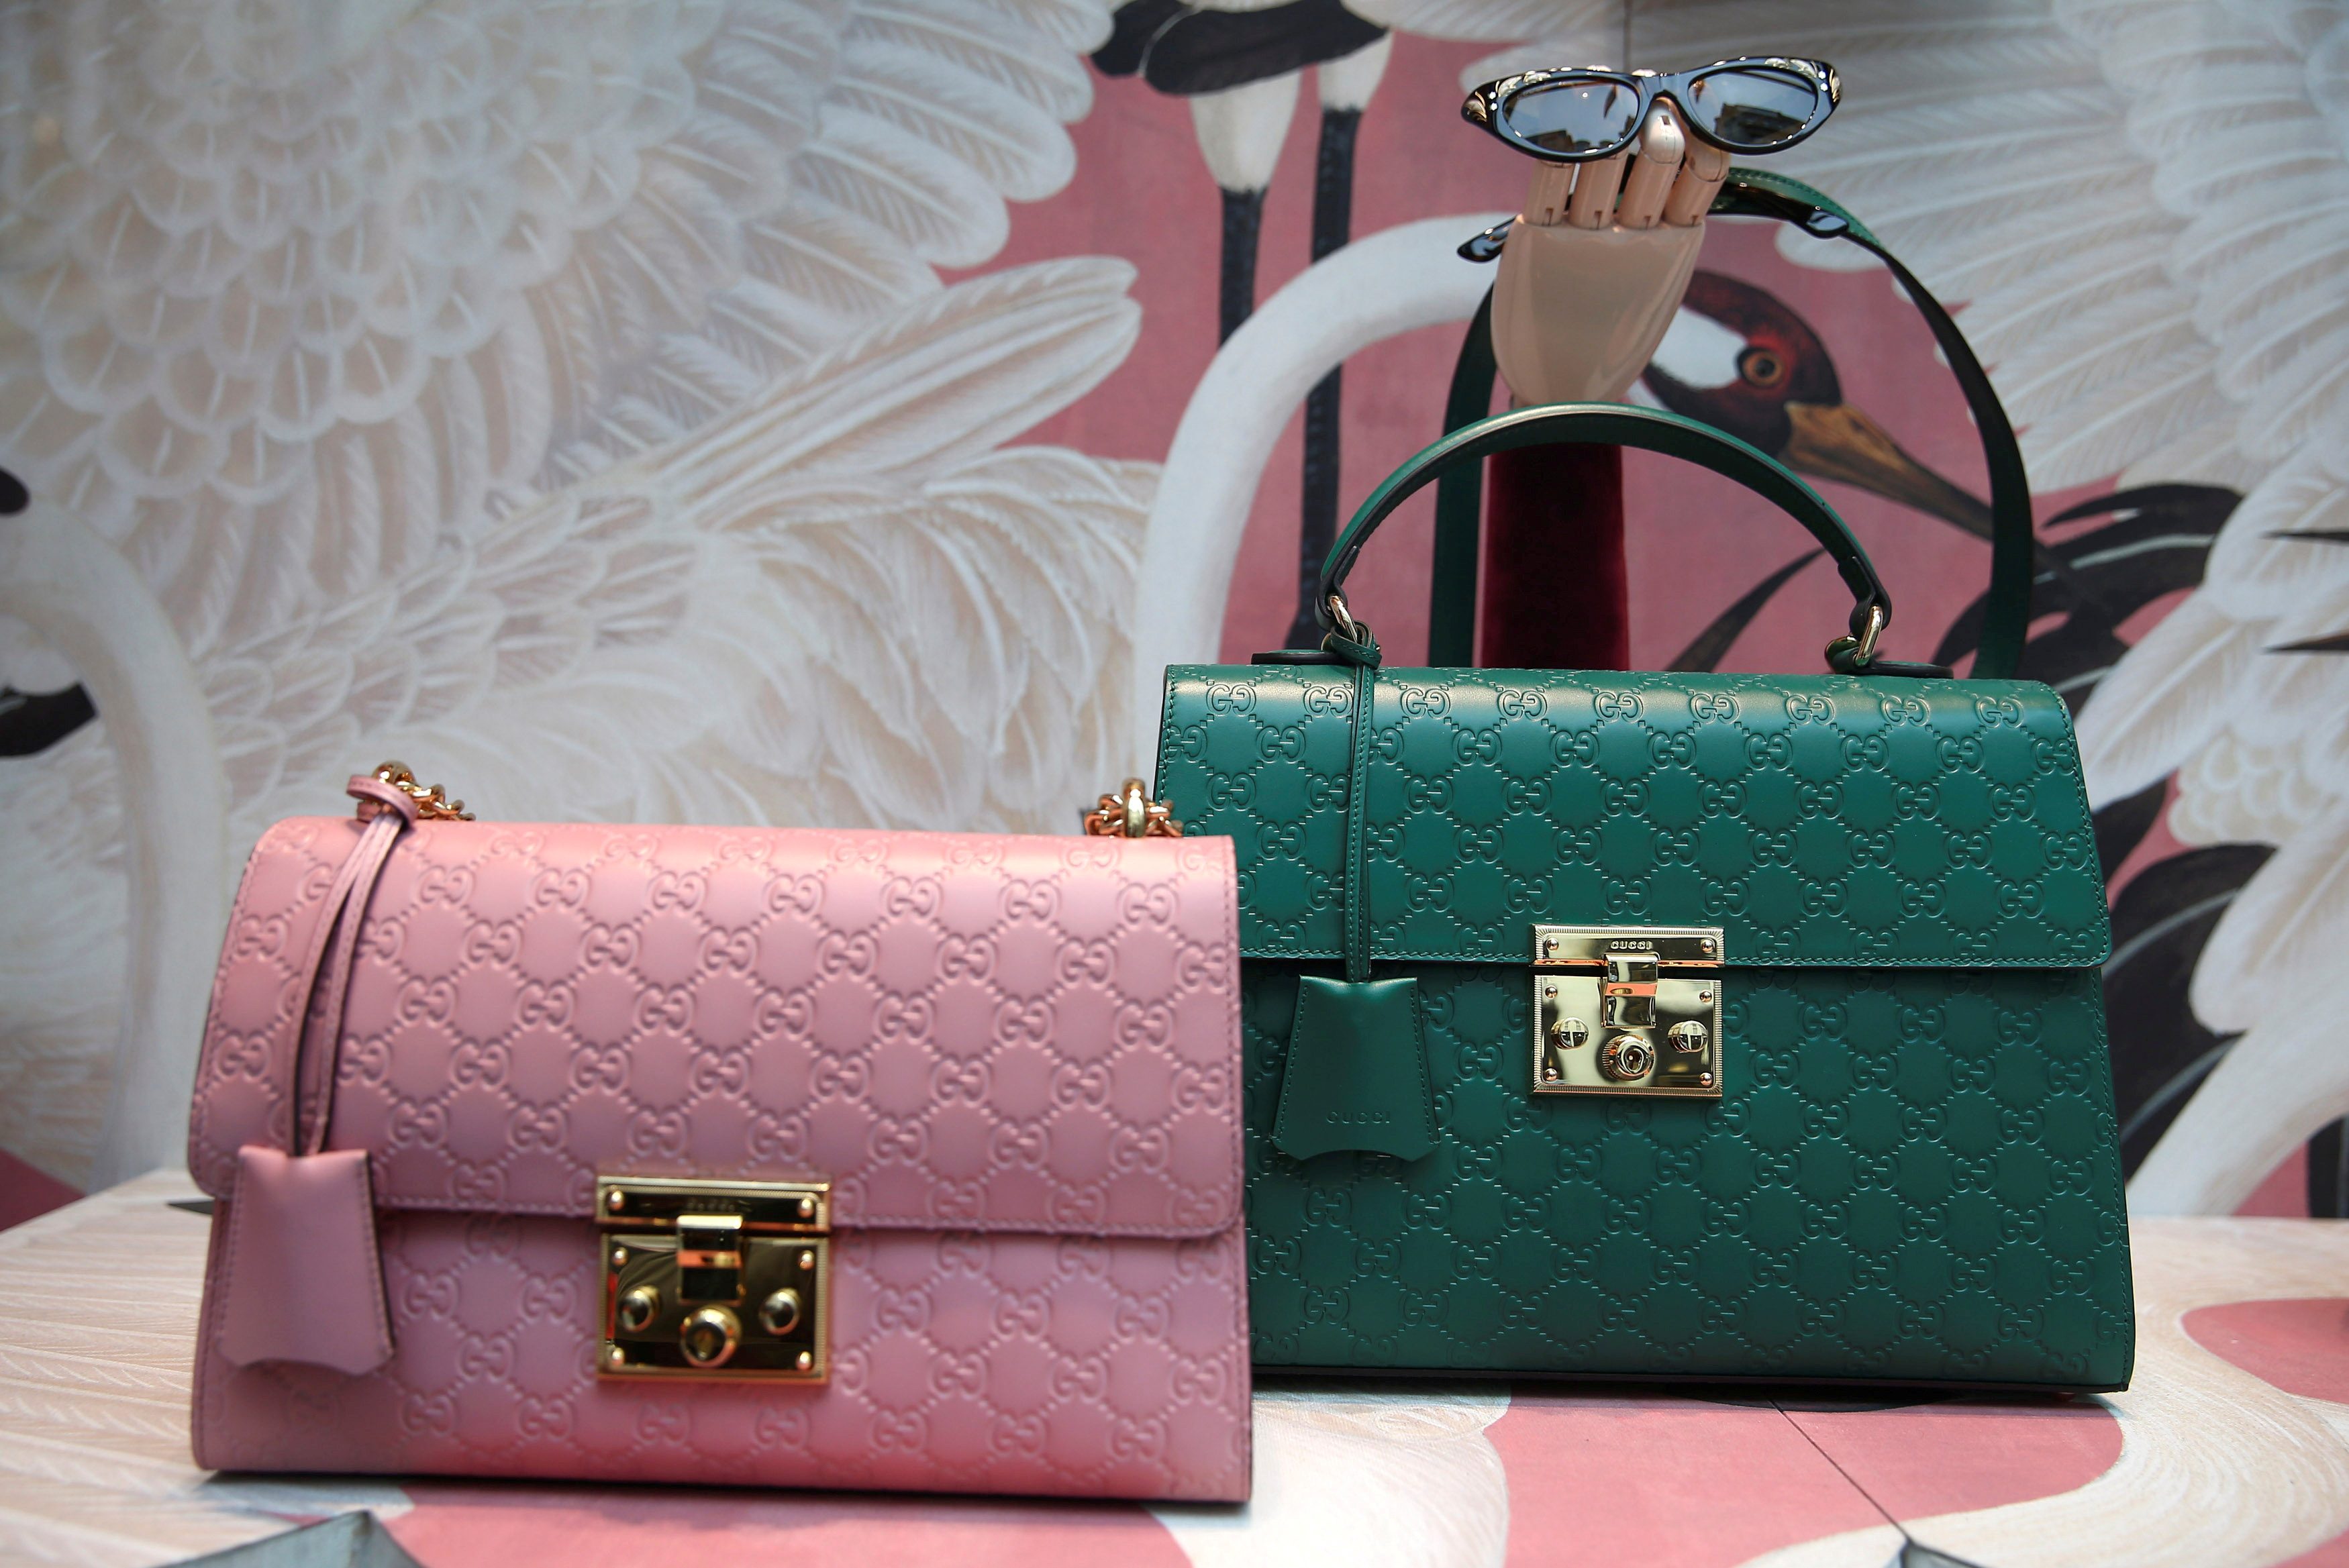 Gucci, Facebook file joint lawsuit against alleged counterfeiter